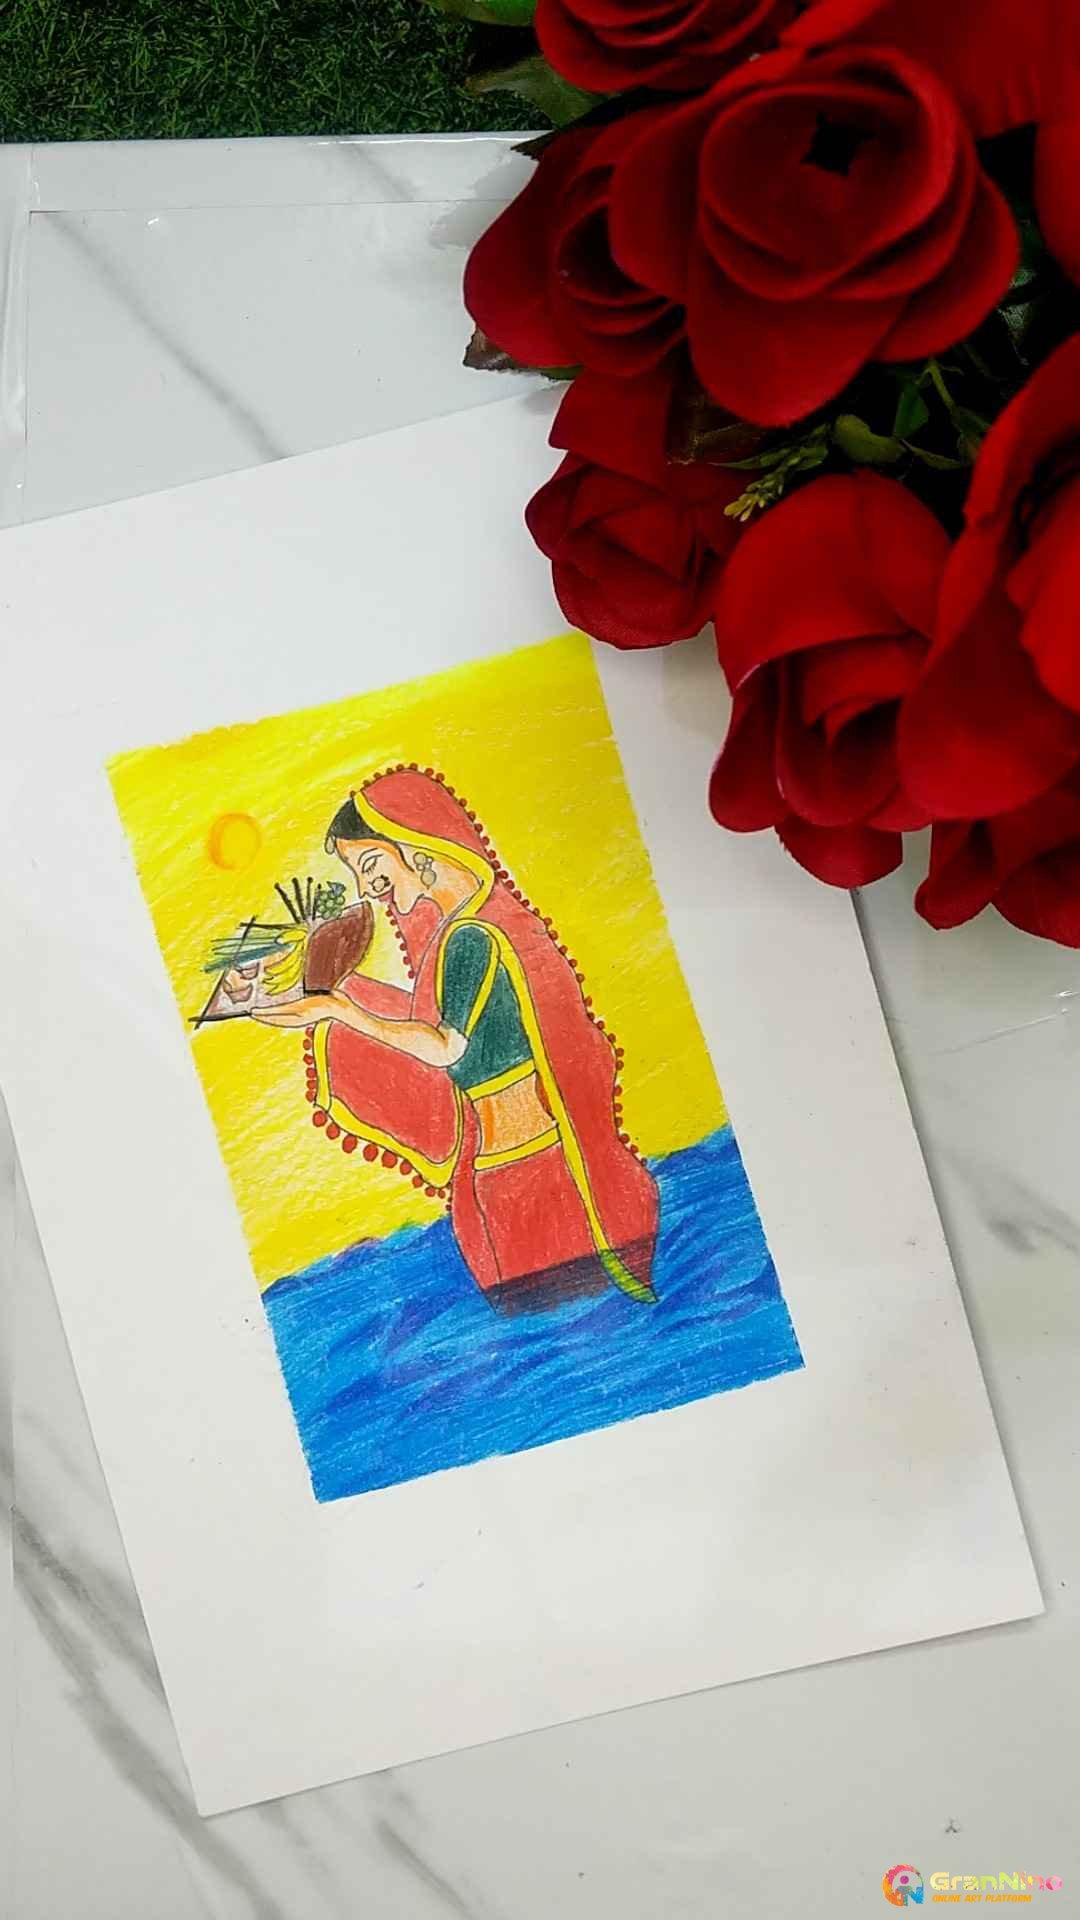 Buy CHHATH PUJA MADHUBANI PAINTING Canvas Art Print by ANIKA JHA.  Code:PRT_8054_61960 - Prints for Sale online in India.